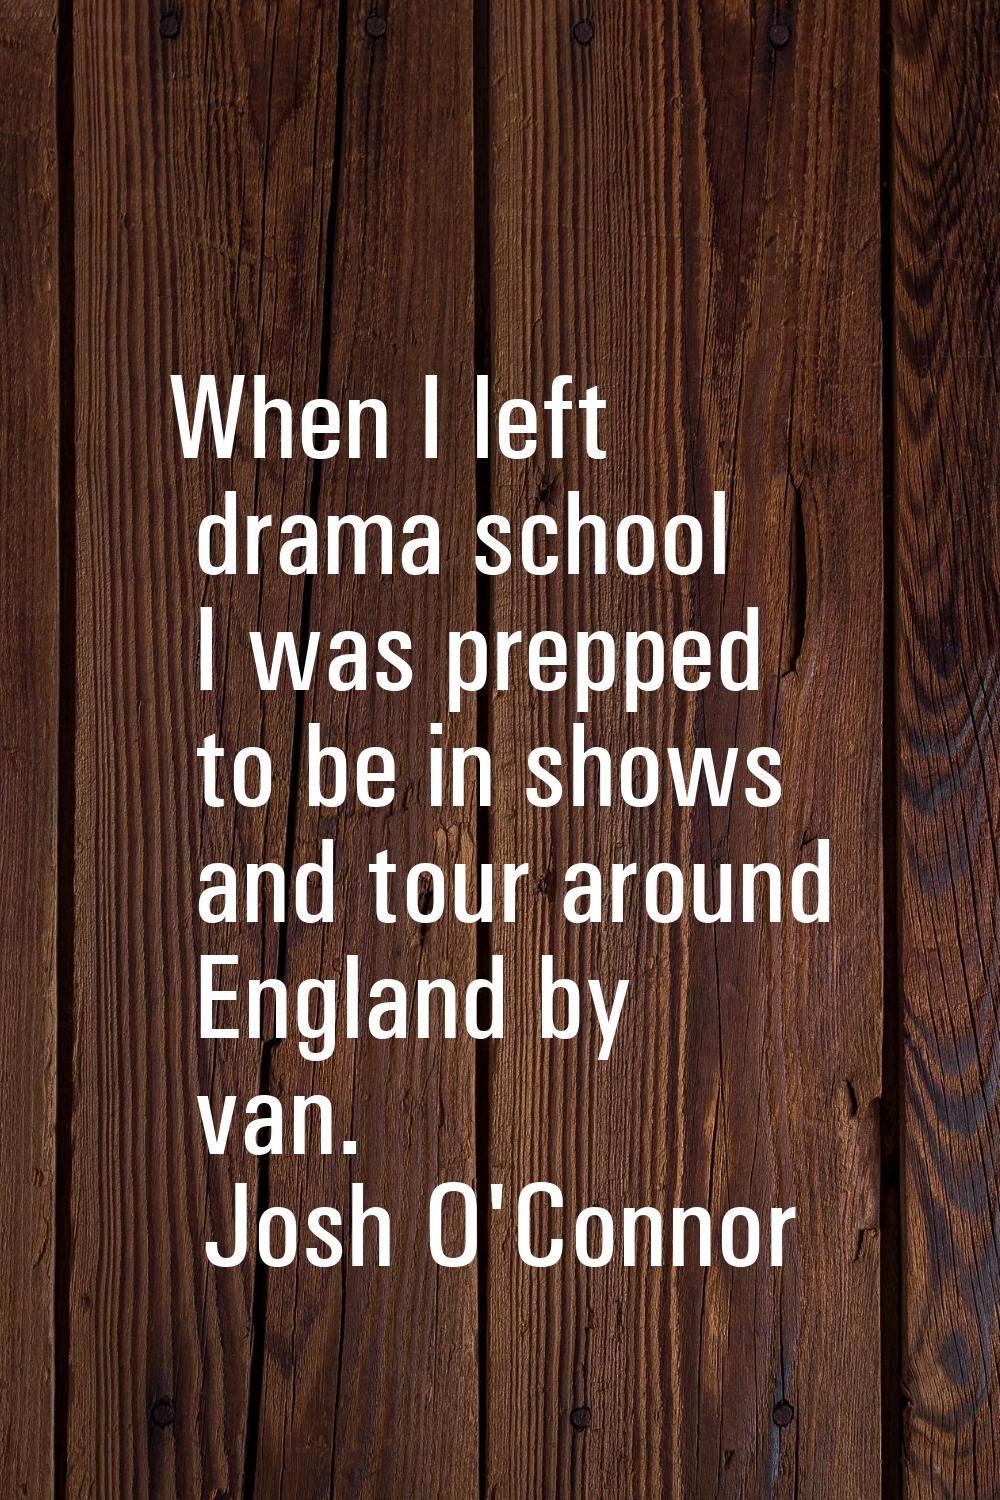 When I left drama school I was prepped to be in shows and tour around England by van.